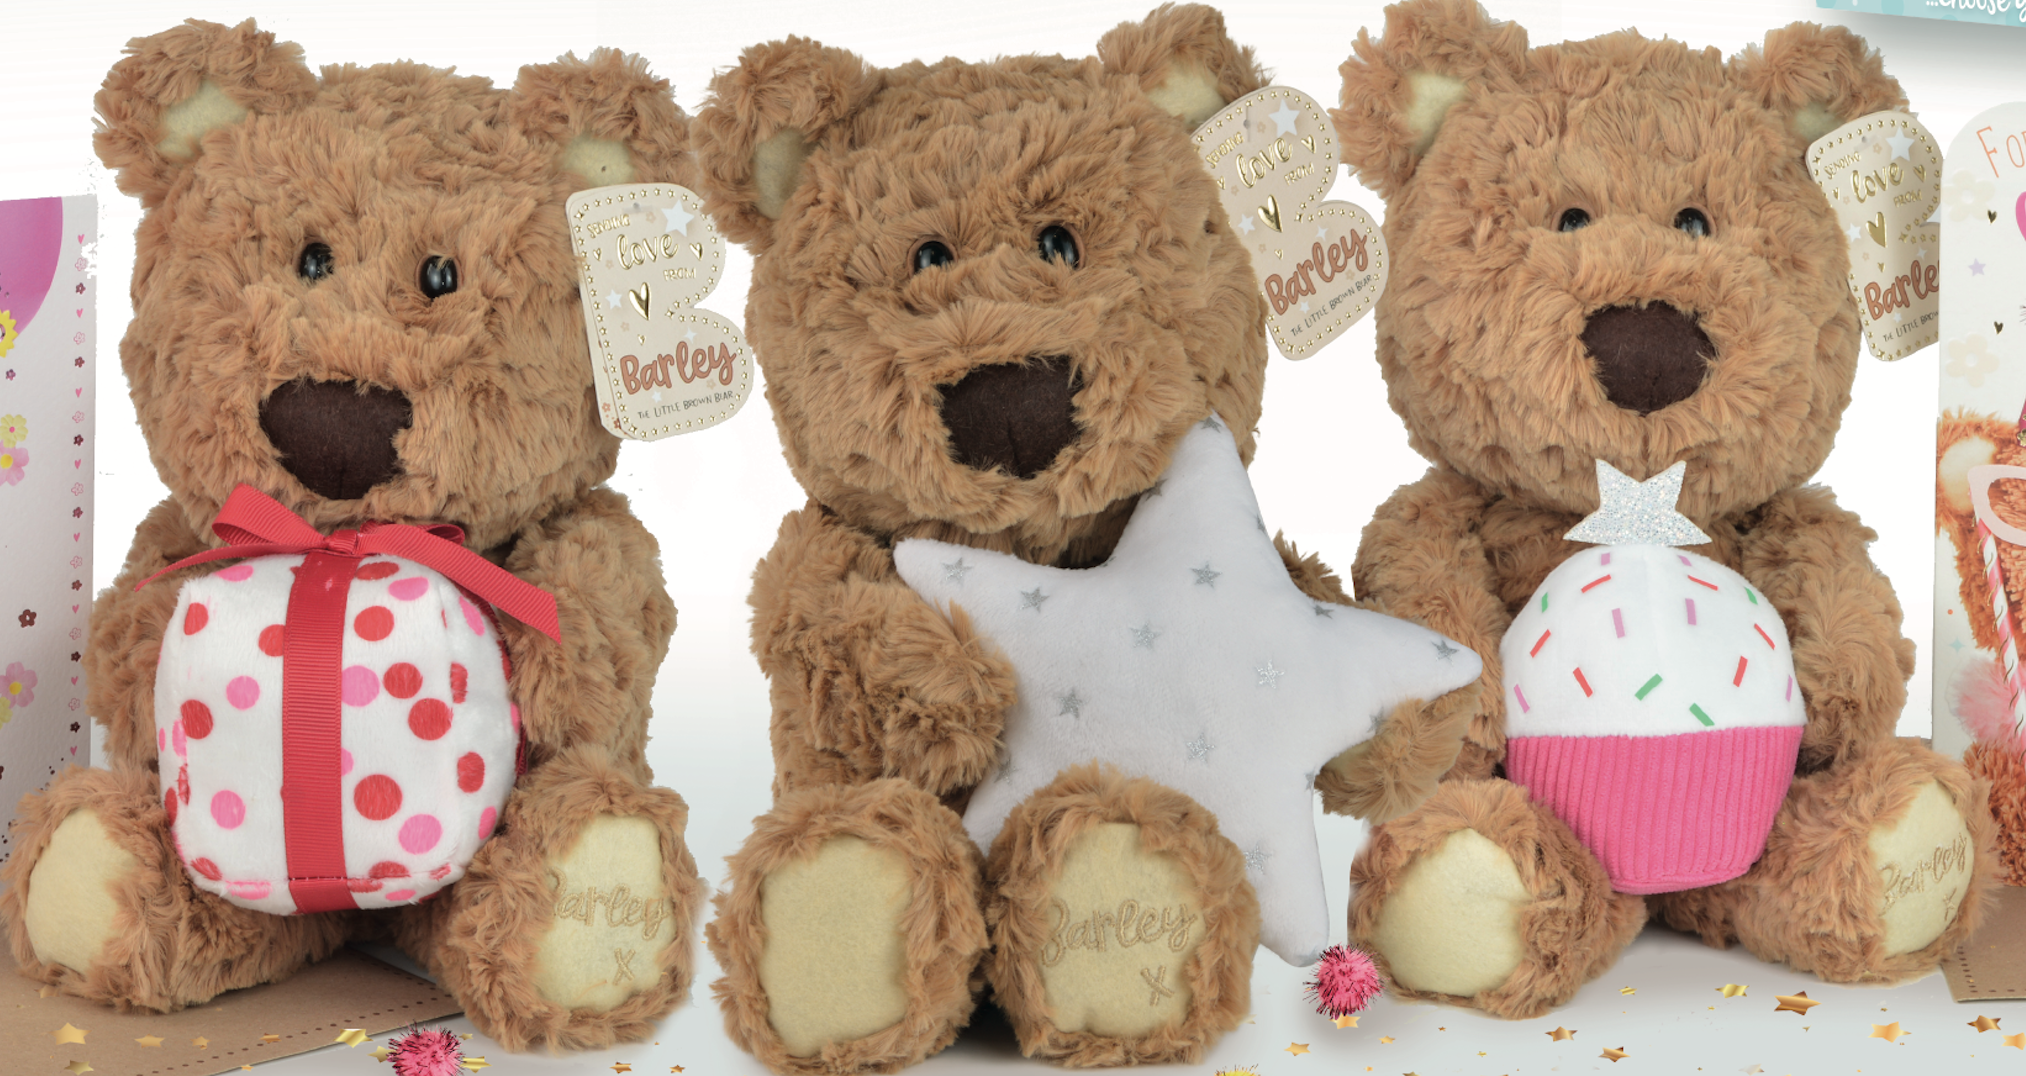 Above: The new Barley Bear plush from IC&G